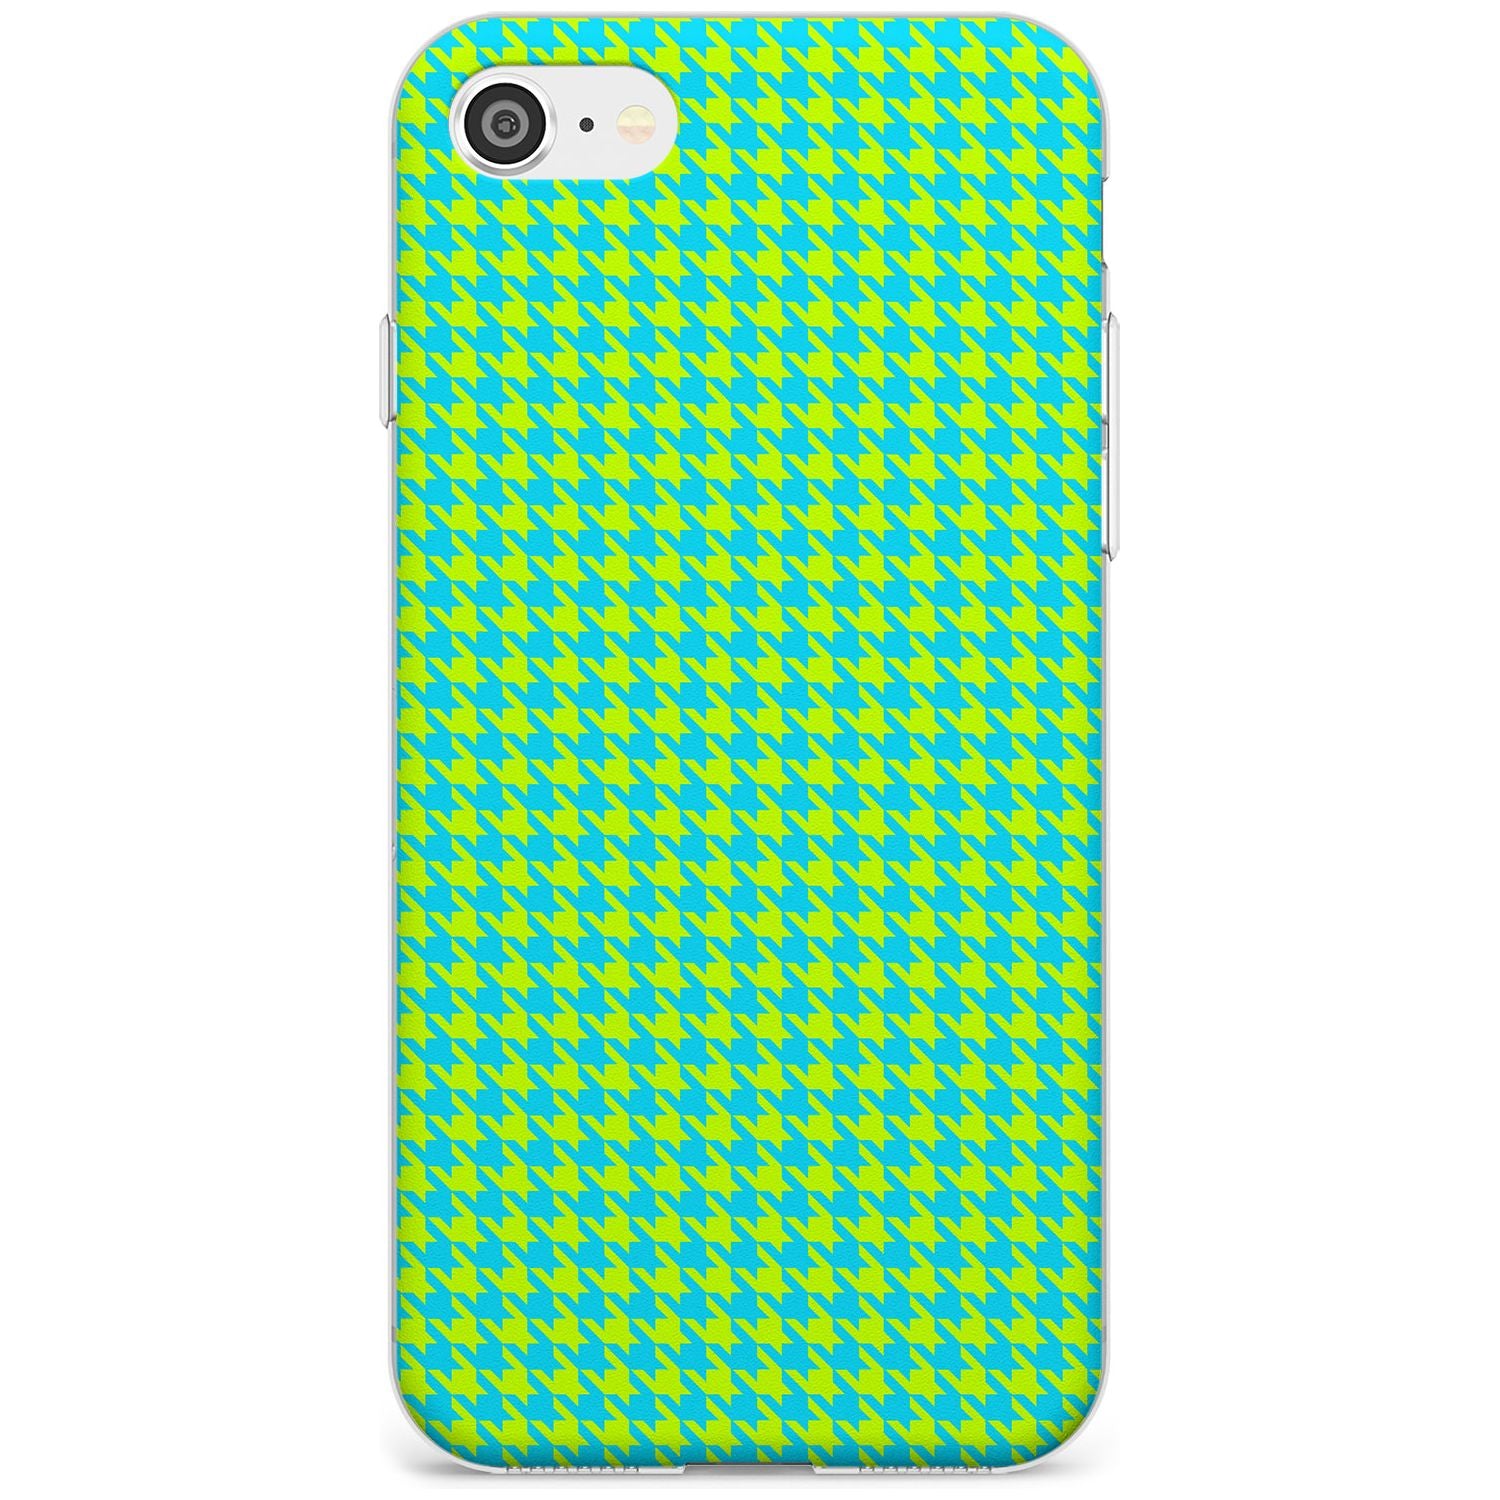 Neon Lime & Turquoise Houndstooth Pattern Slim TPU Phone Case for iPhone SE 8 7 Plus